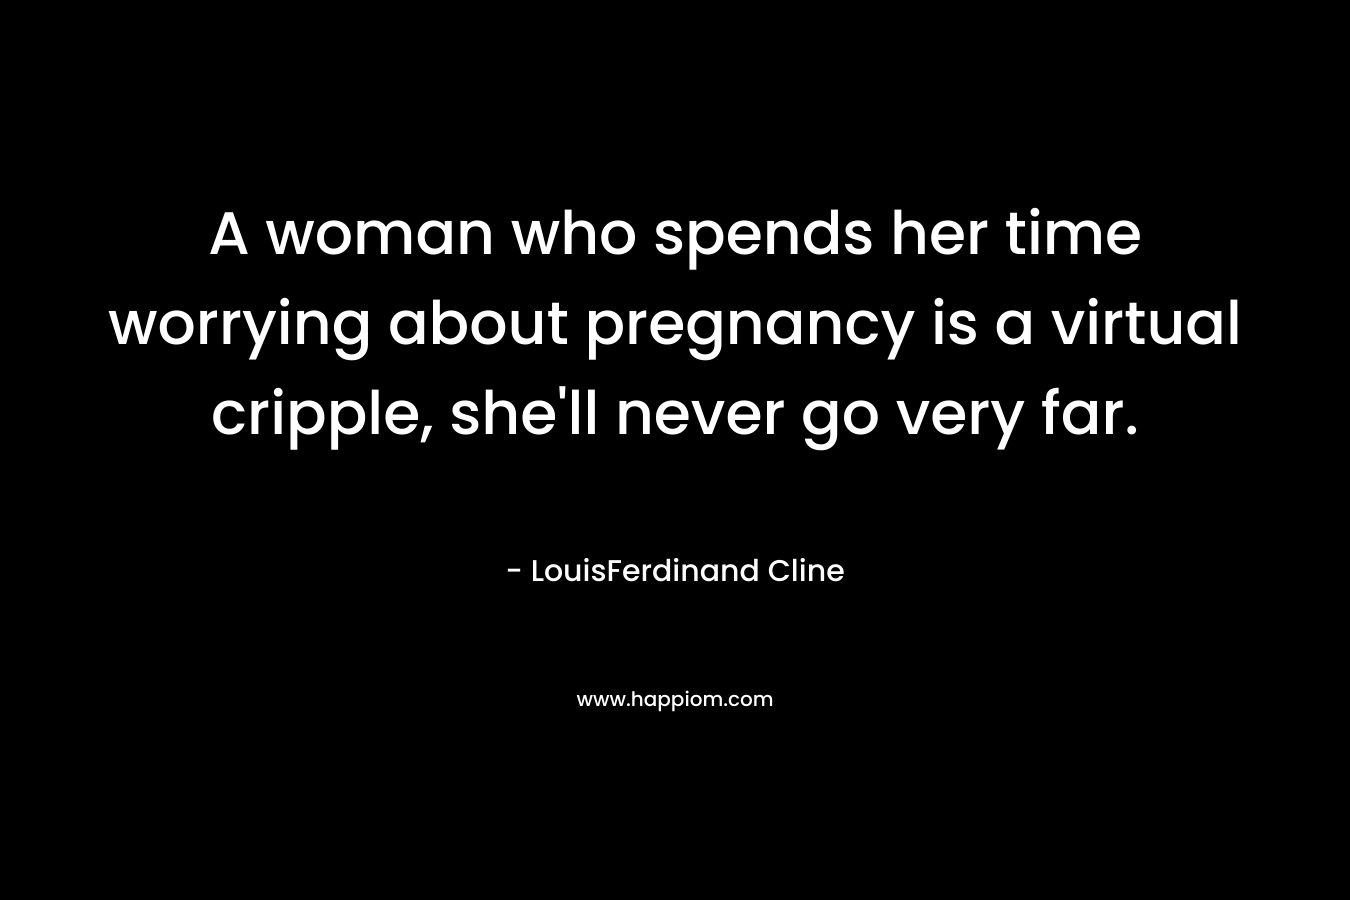 A woman who spends her time worrying about pregnancy is a virtual cripple, she’ll never go very far. – LouisFerdinand Cline